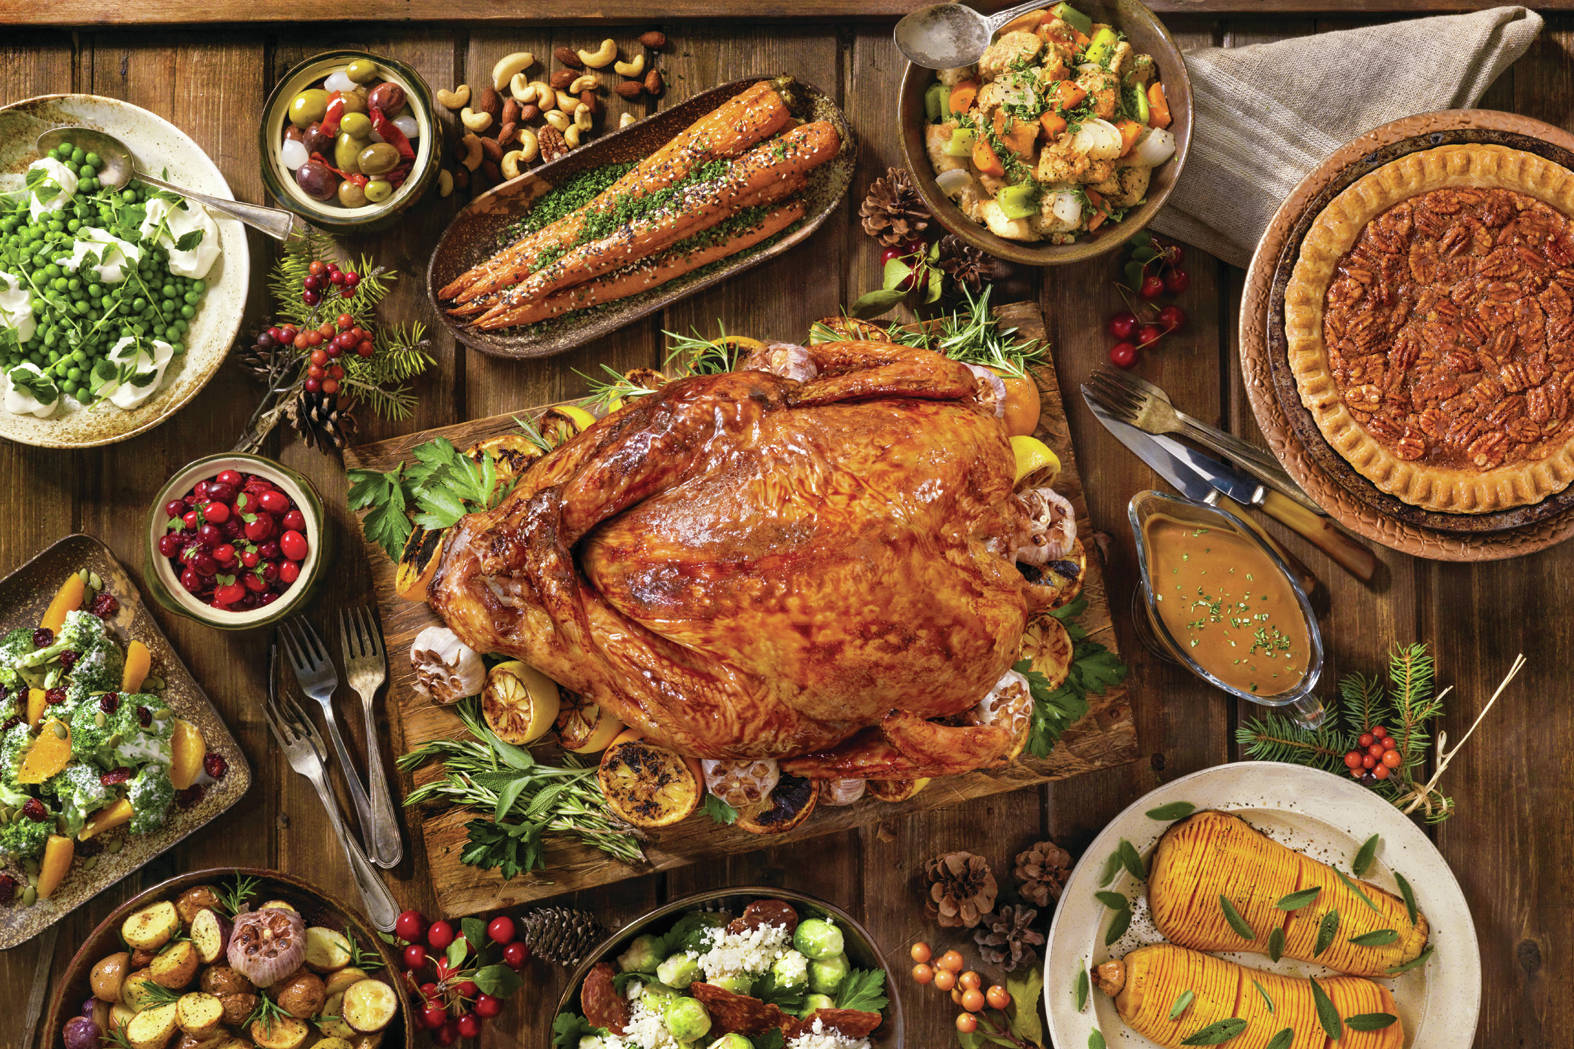 Remembering old-fashioned Thanksgiving on the farm